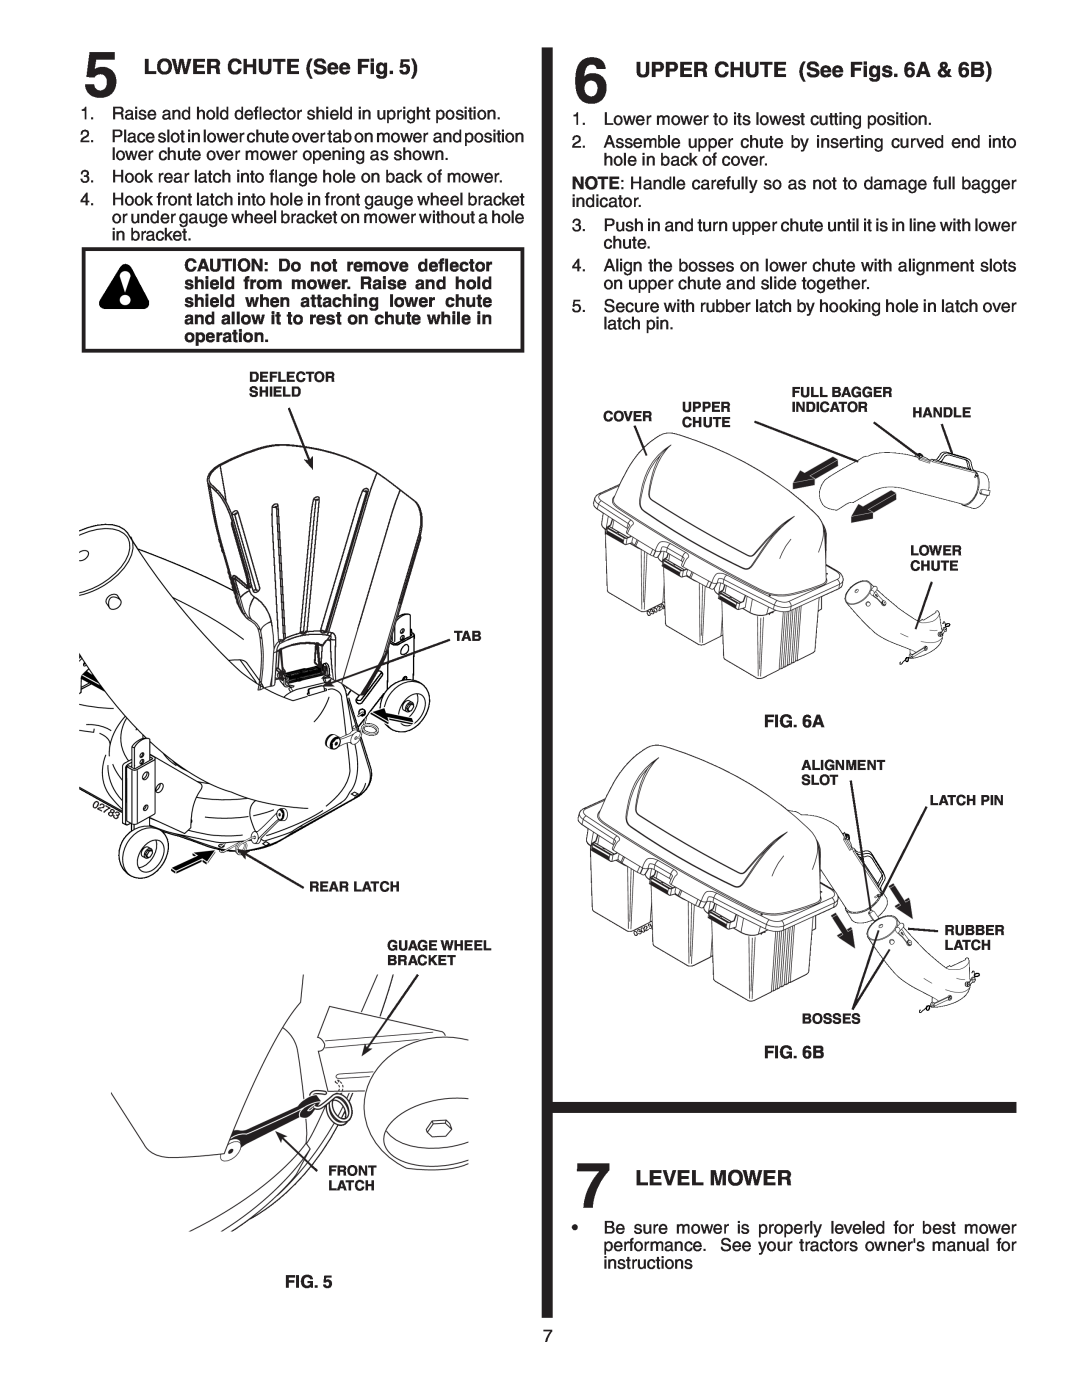 Poulan 406288, LTT354, 96072001200, 960 72 00-12 owner manual LOWER CHUTE See Fig, UPPER CHUTE See Figs. 6A & 6B, Level Mower 